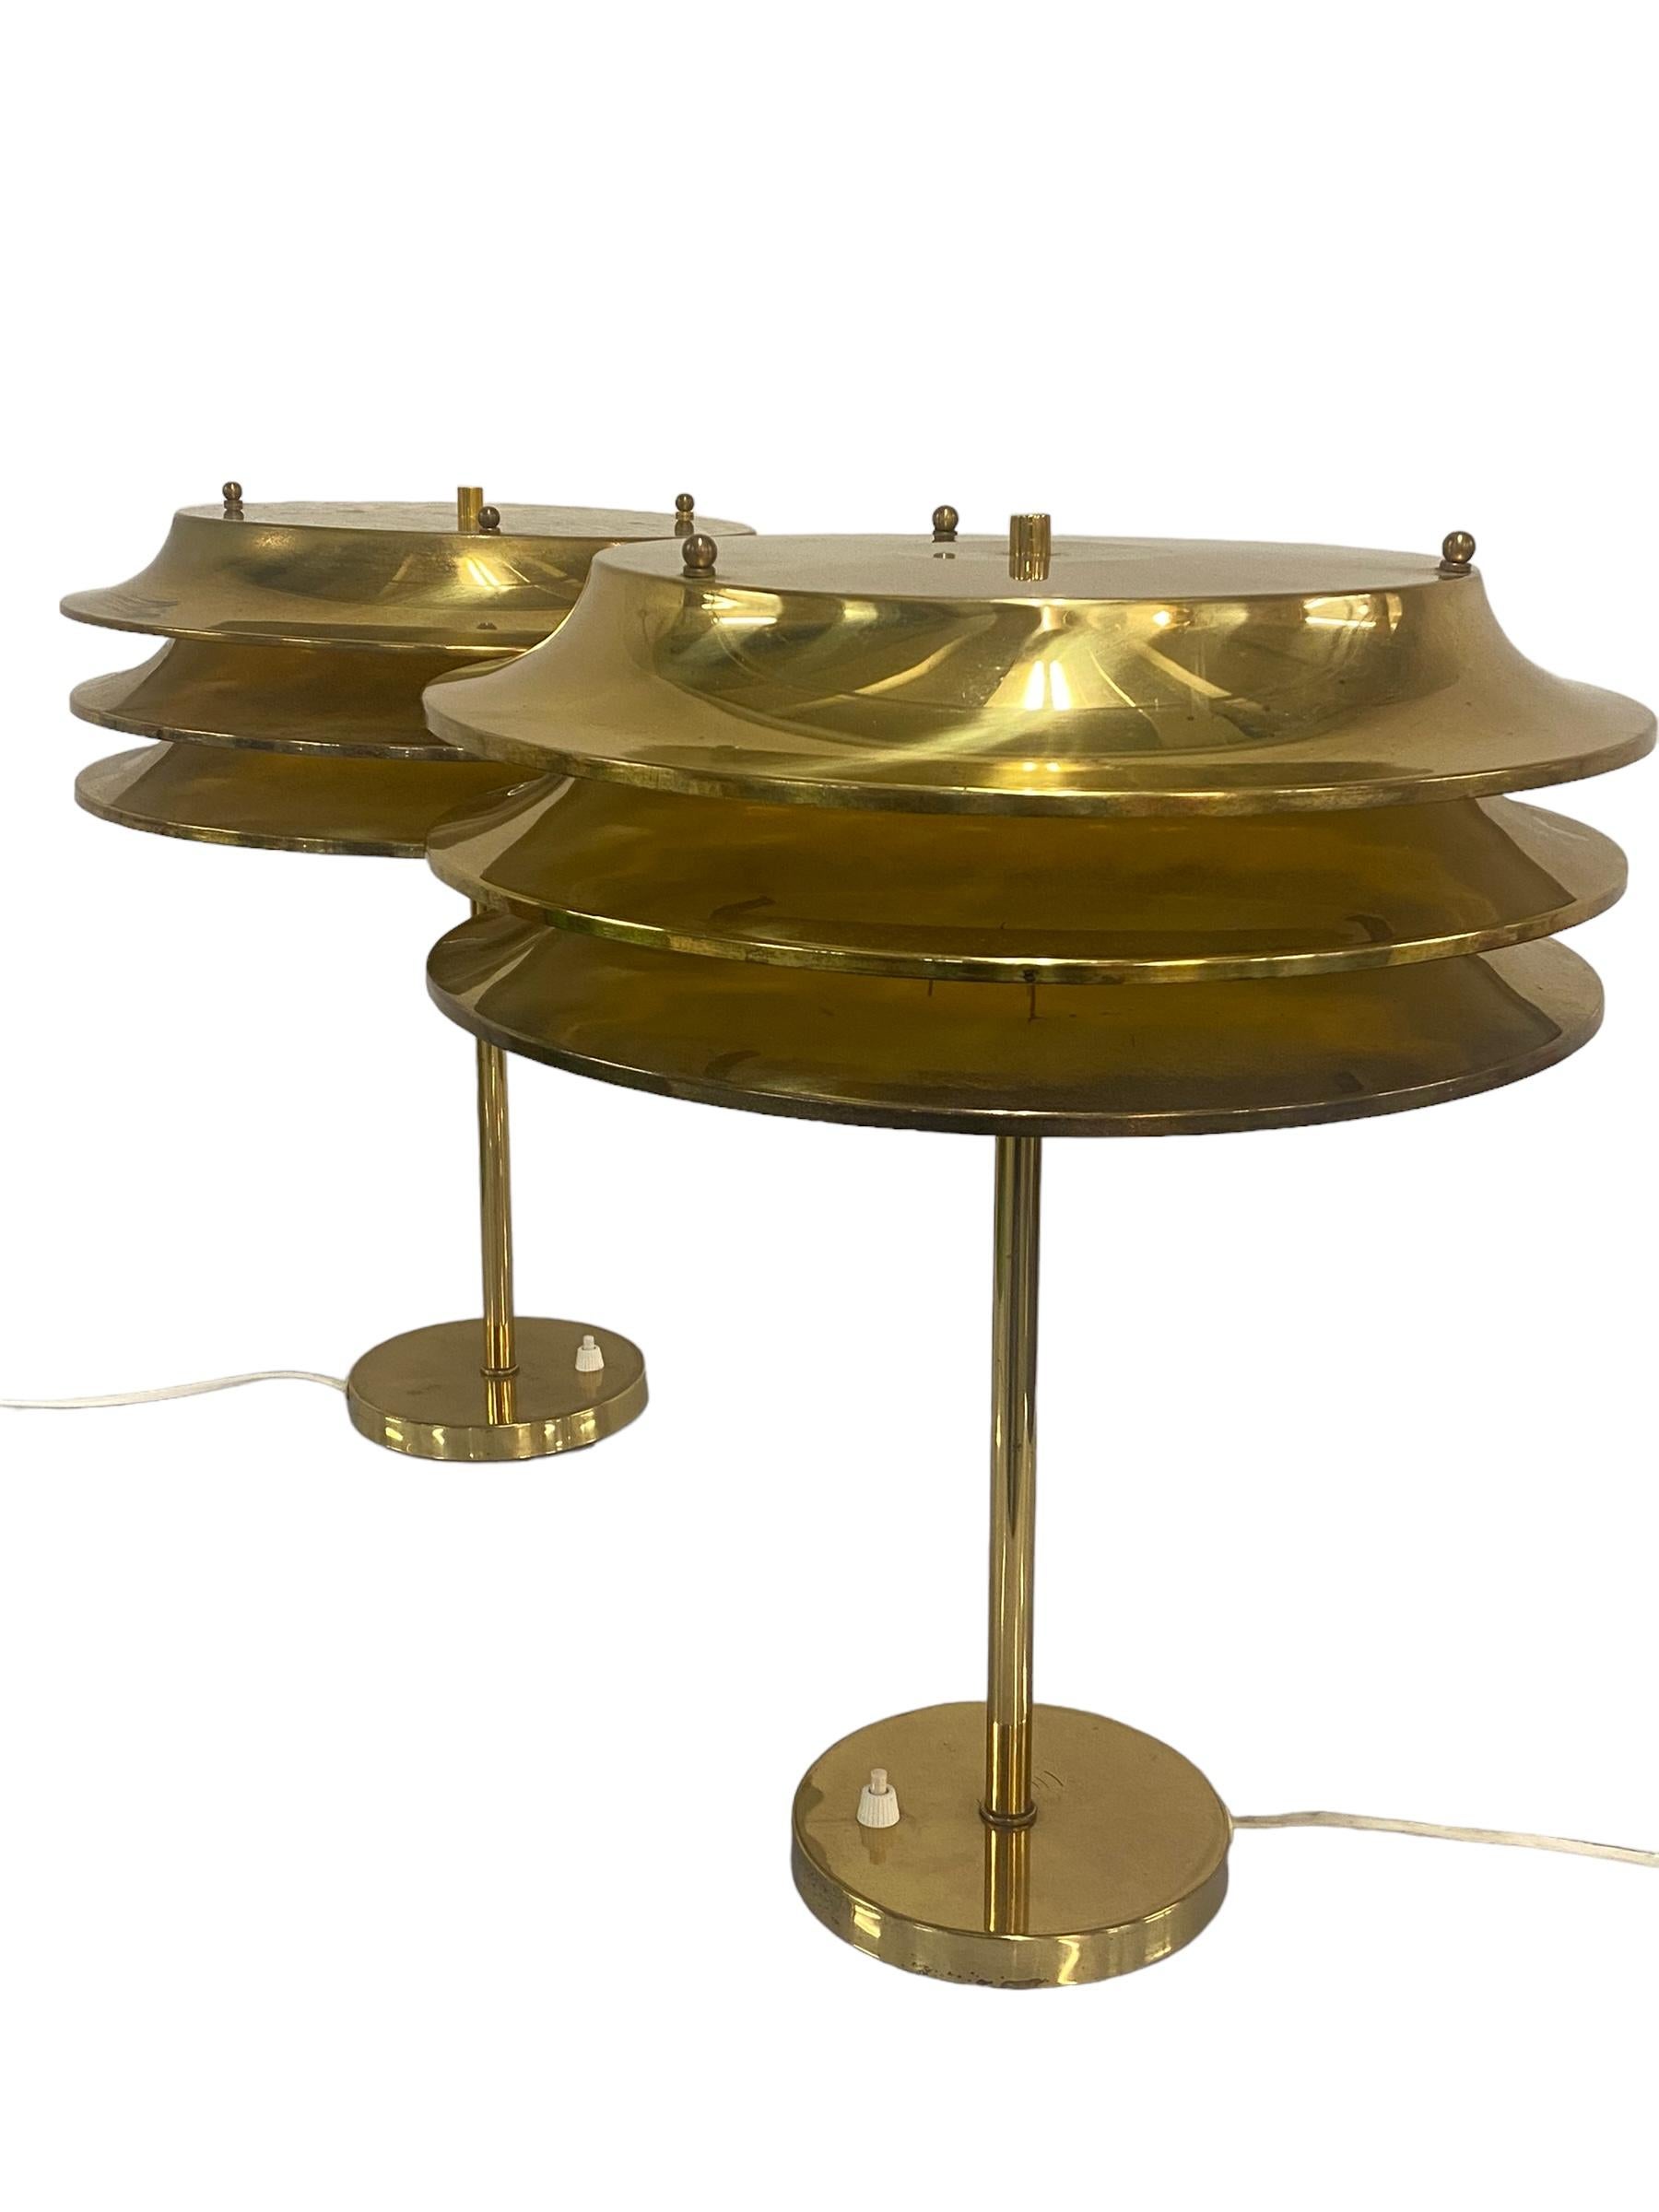 Brass A Pair of Kai Ruokonen 'Finnmark' Table Lamps for the Vaakuna Hotel, Lynx, 1970s For Sale